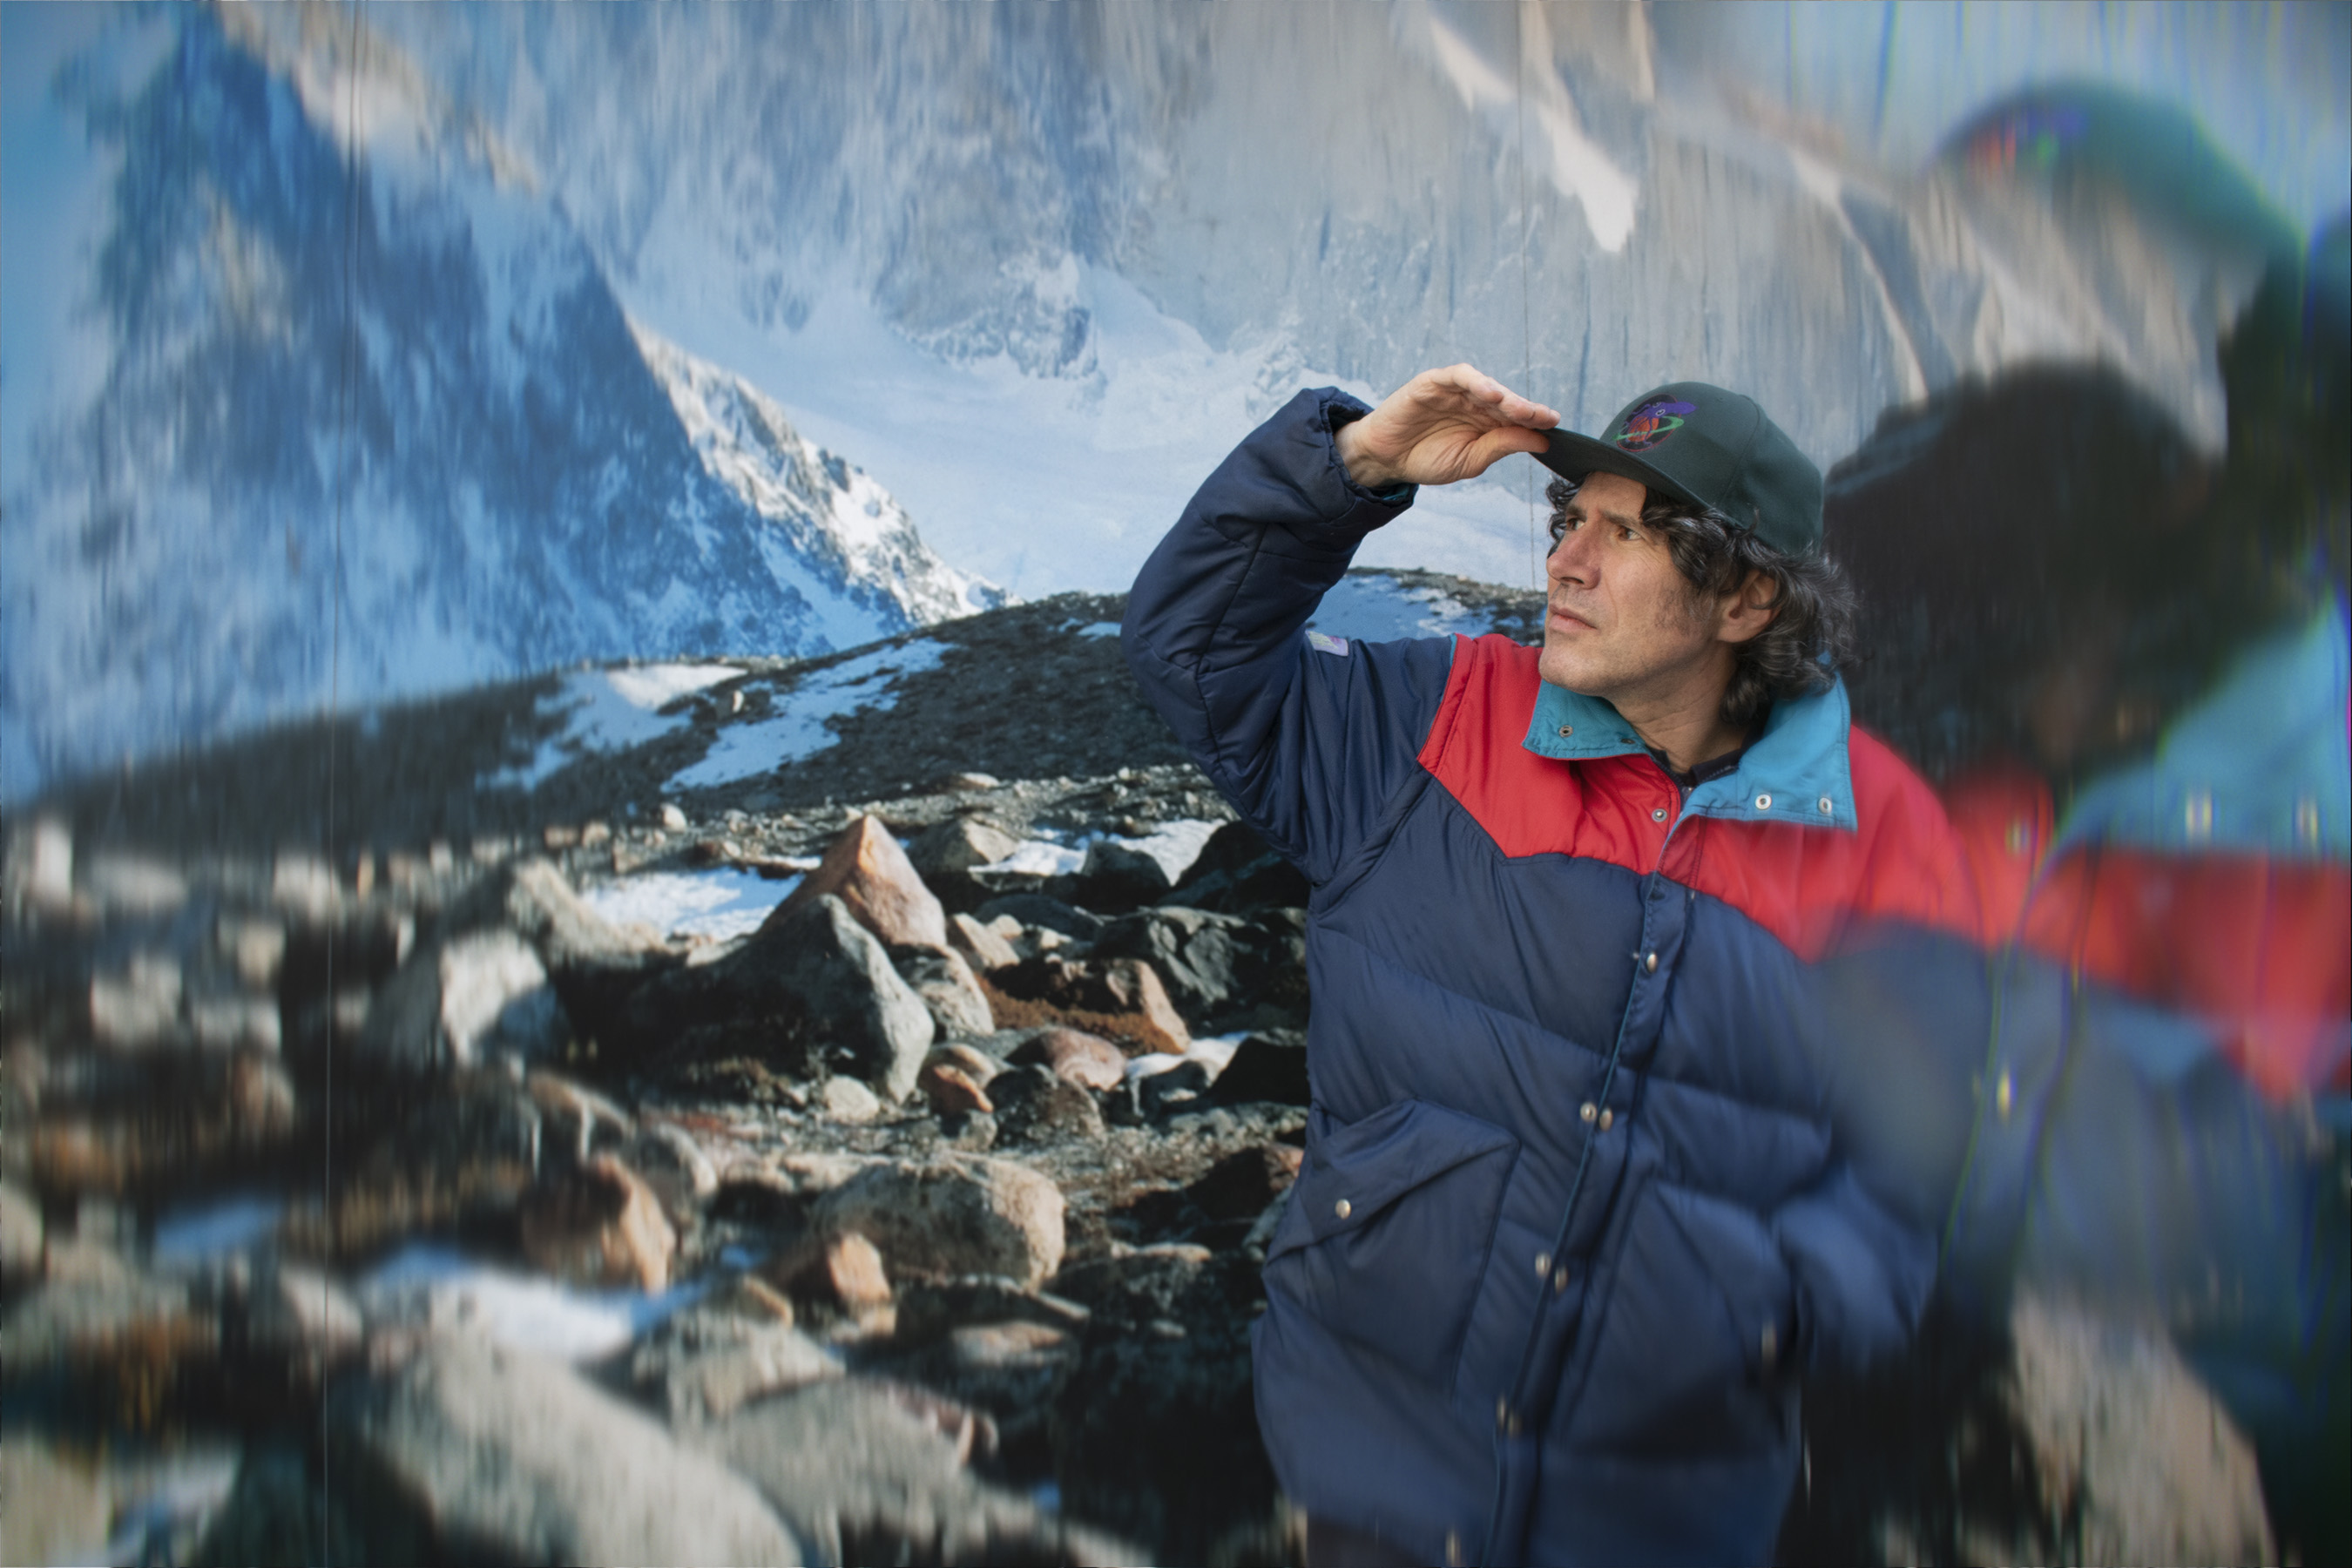 Gruff Rhys in blue jacket and cap against mountain backdrop